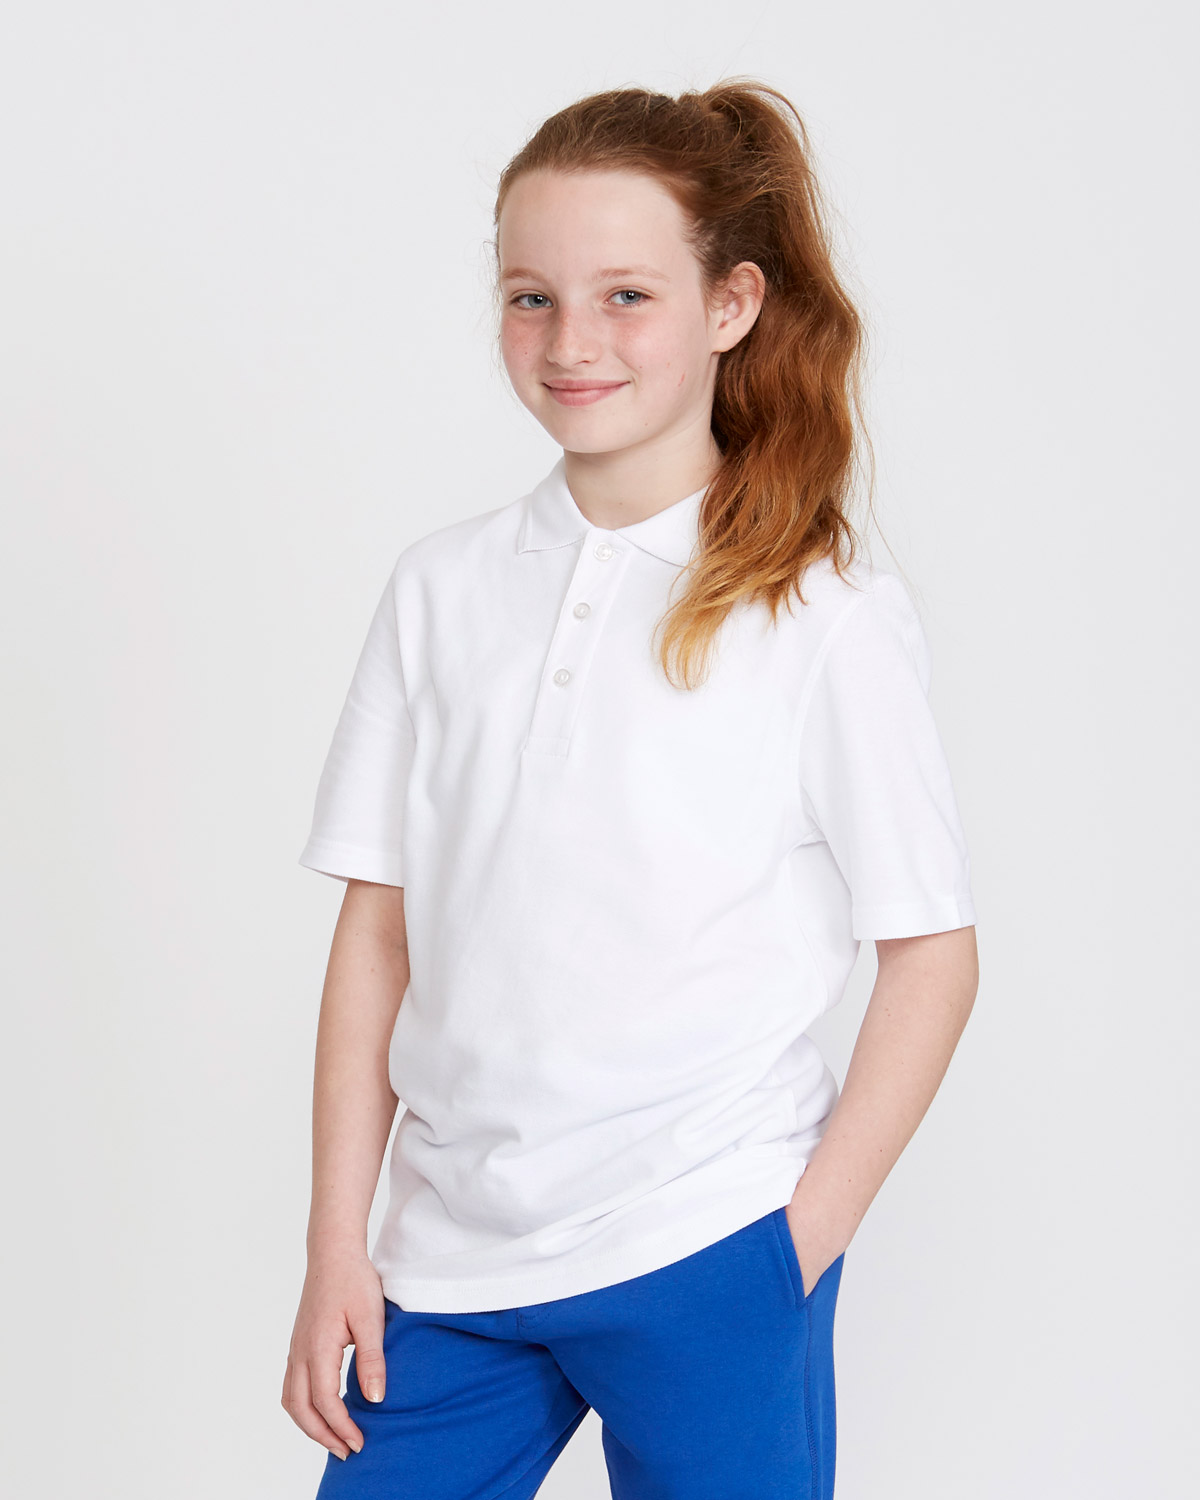 Strait At first leave Dunnes Stores | White Organic Cotton Short-Sleeved Polo Shirts - Pack Of 2